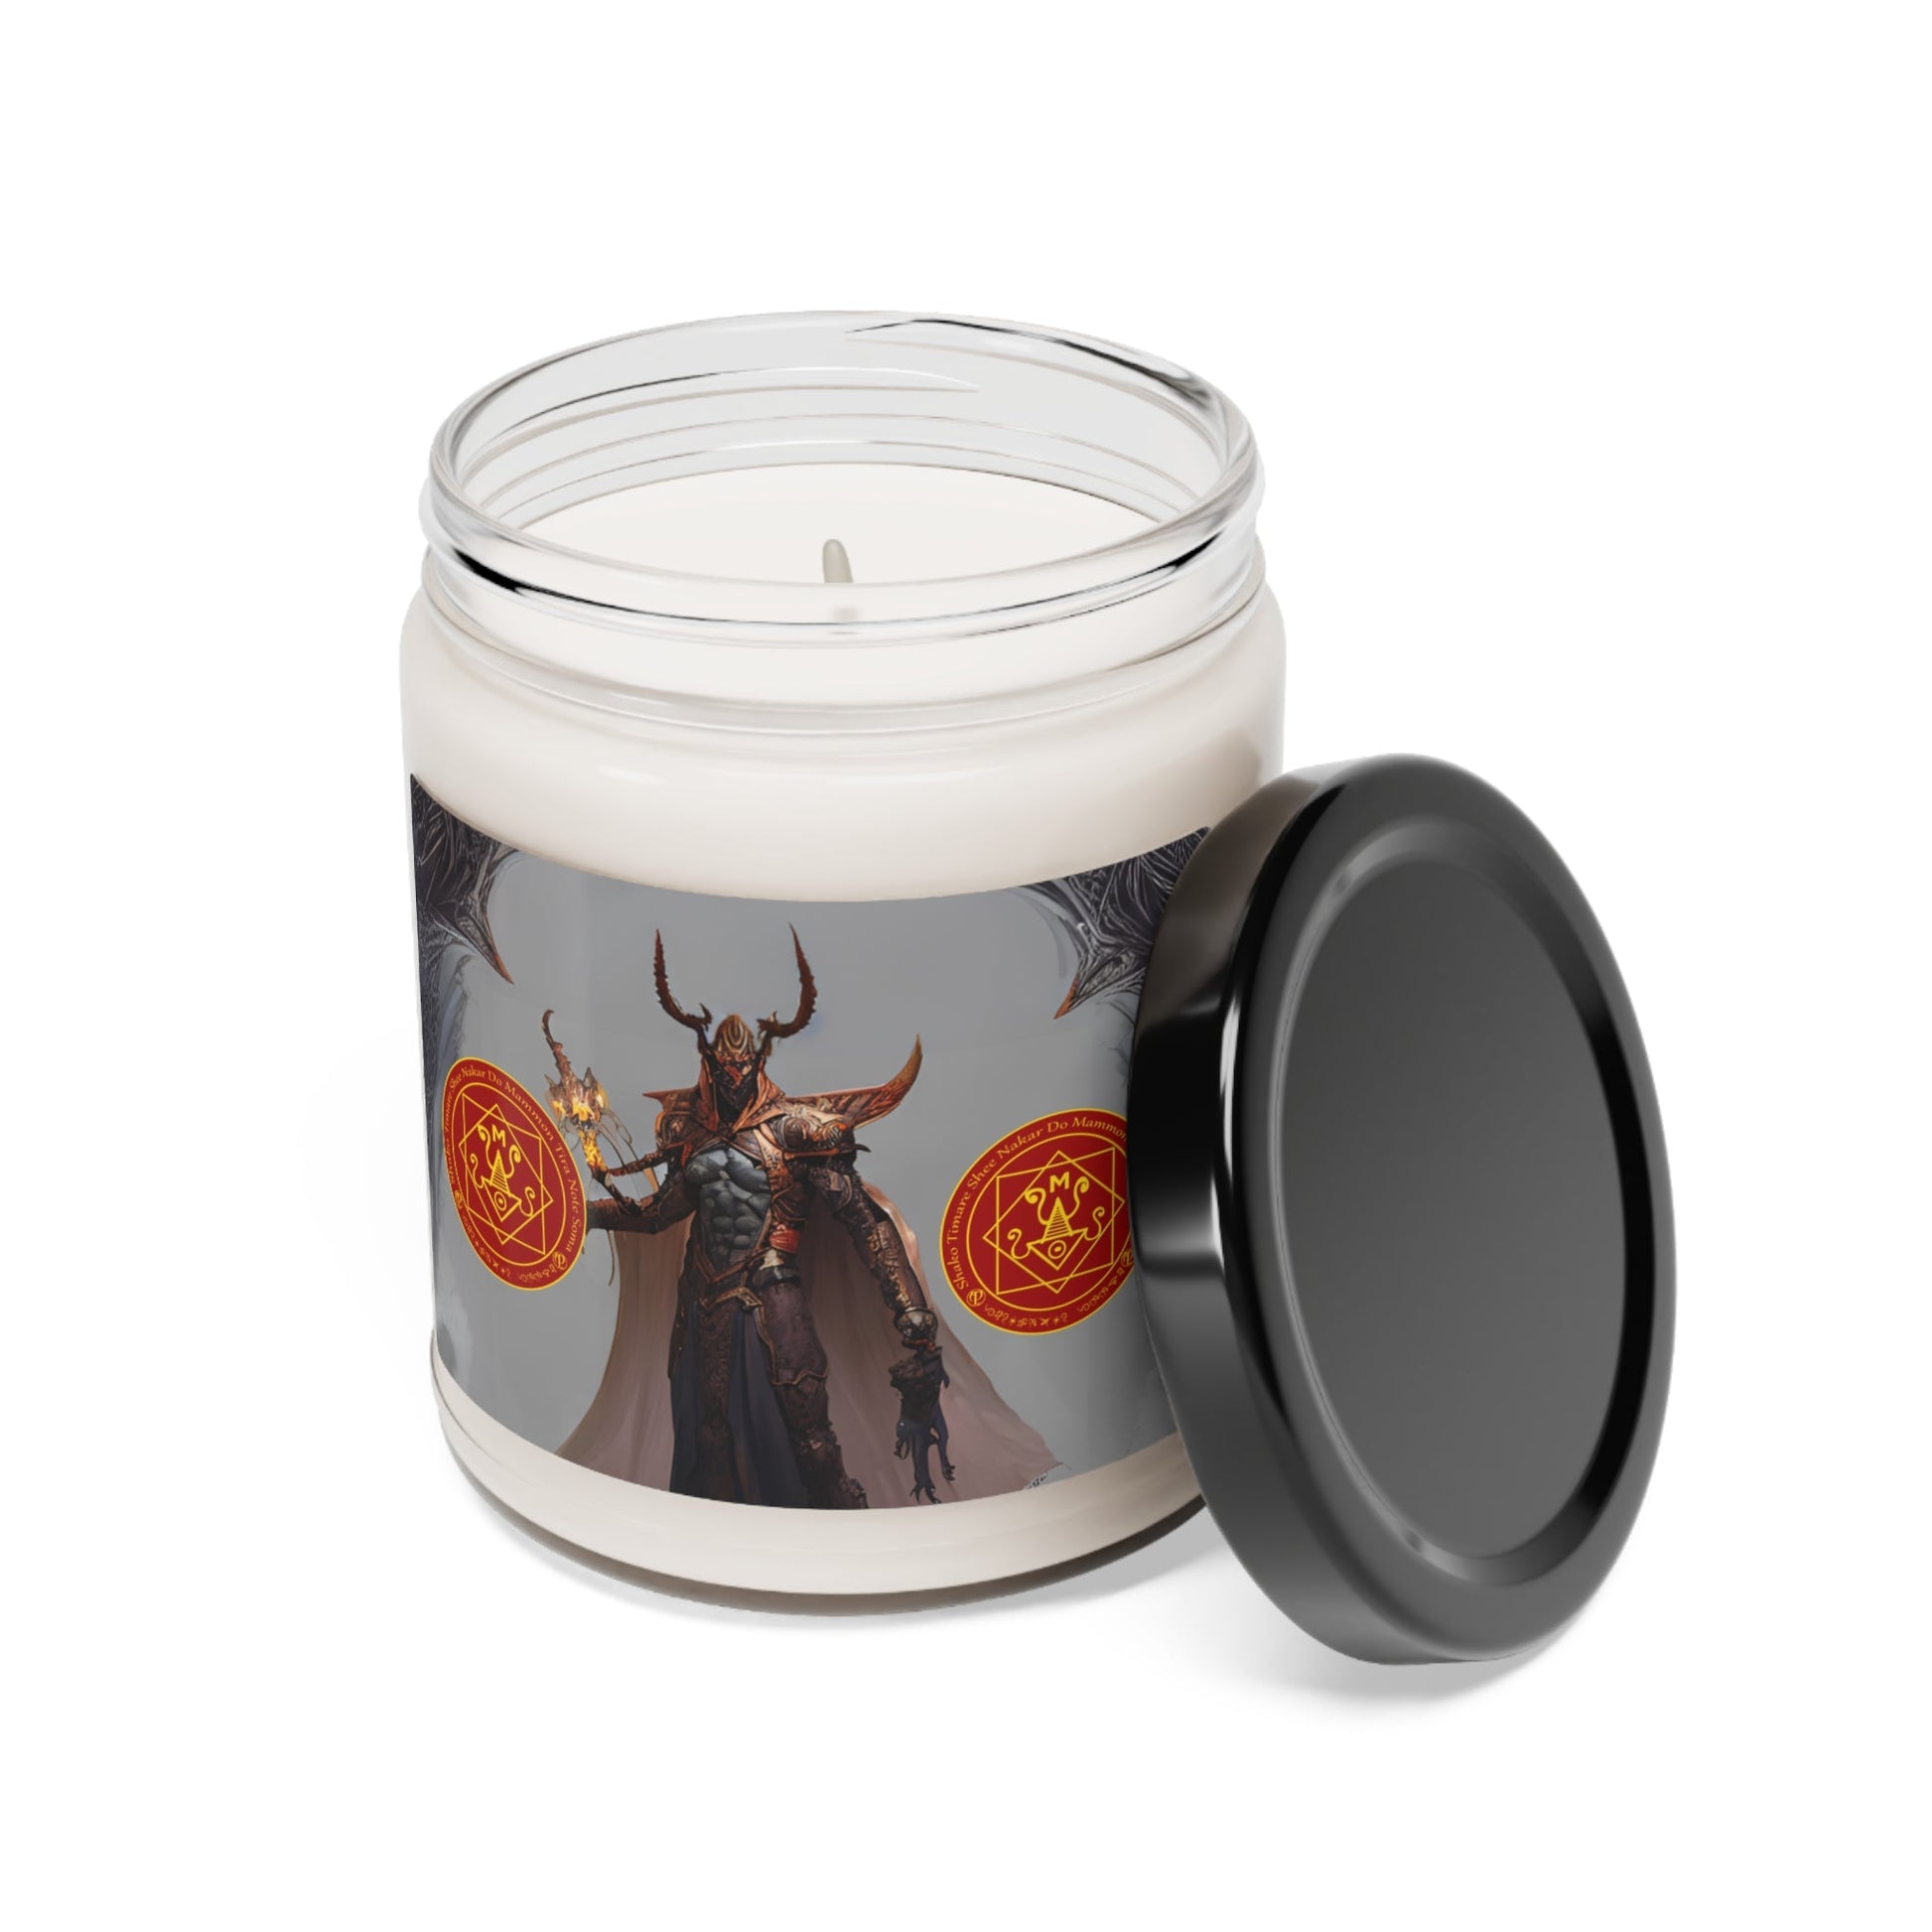 Demon-Mammon-Altar-Scented-Soy-Candle-for-Money-related-offerings-rituals-initiations-or-praying-and-meditation-17